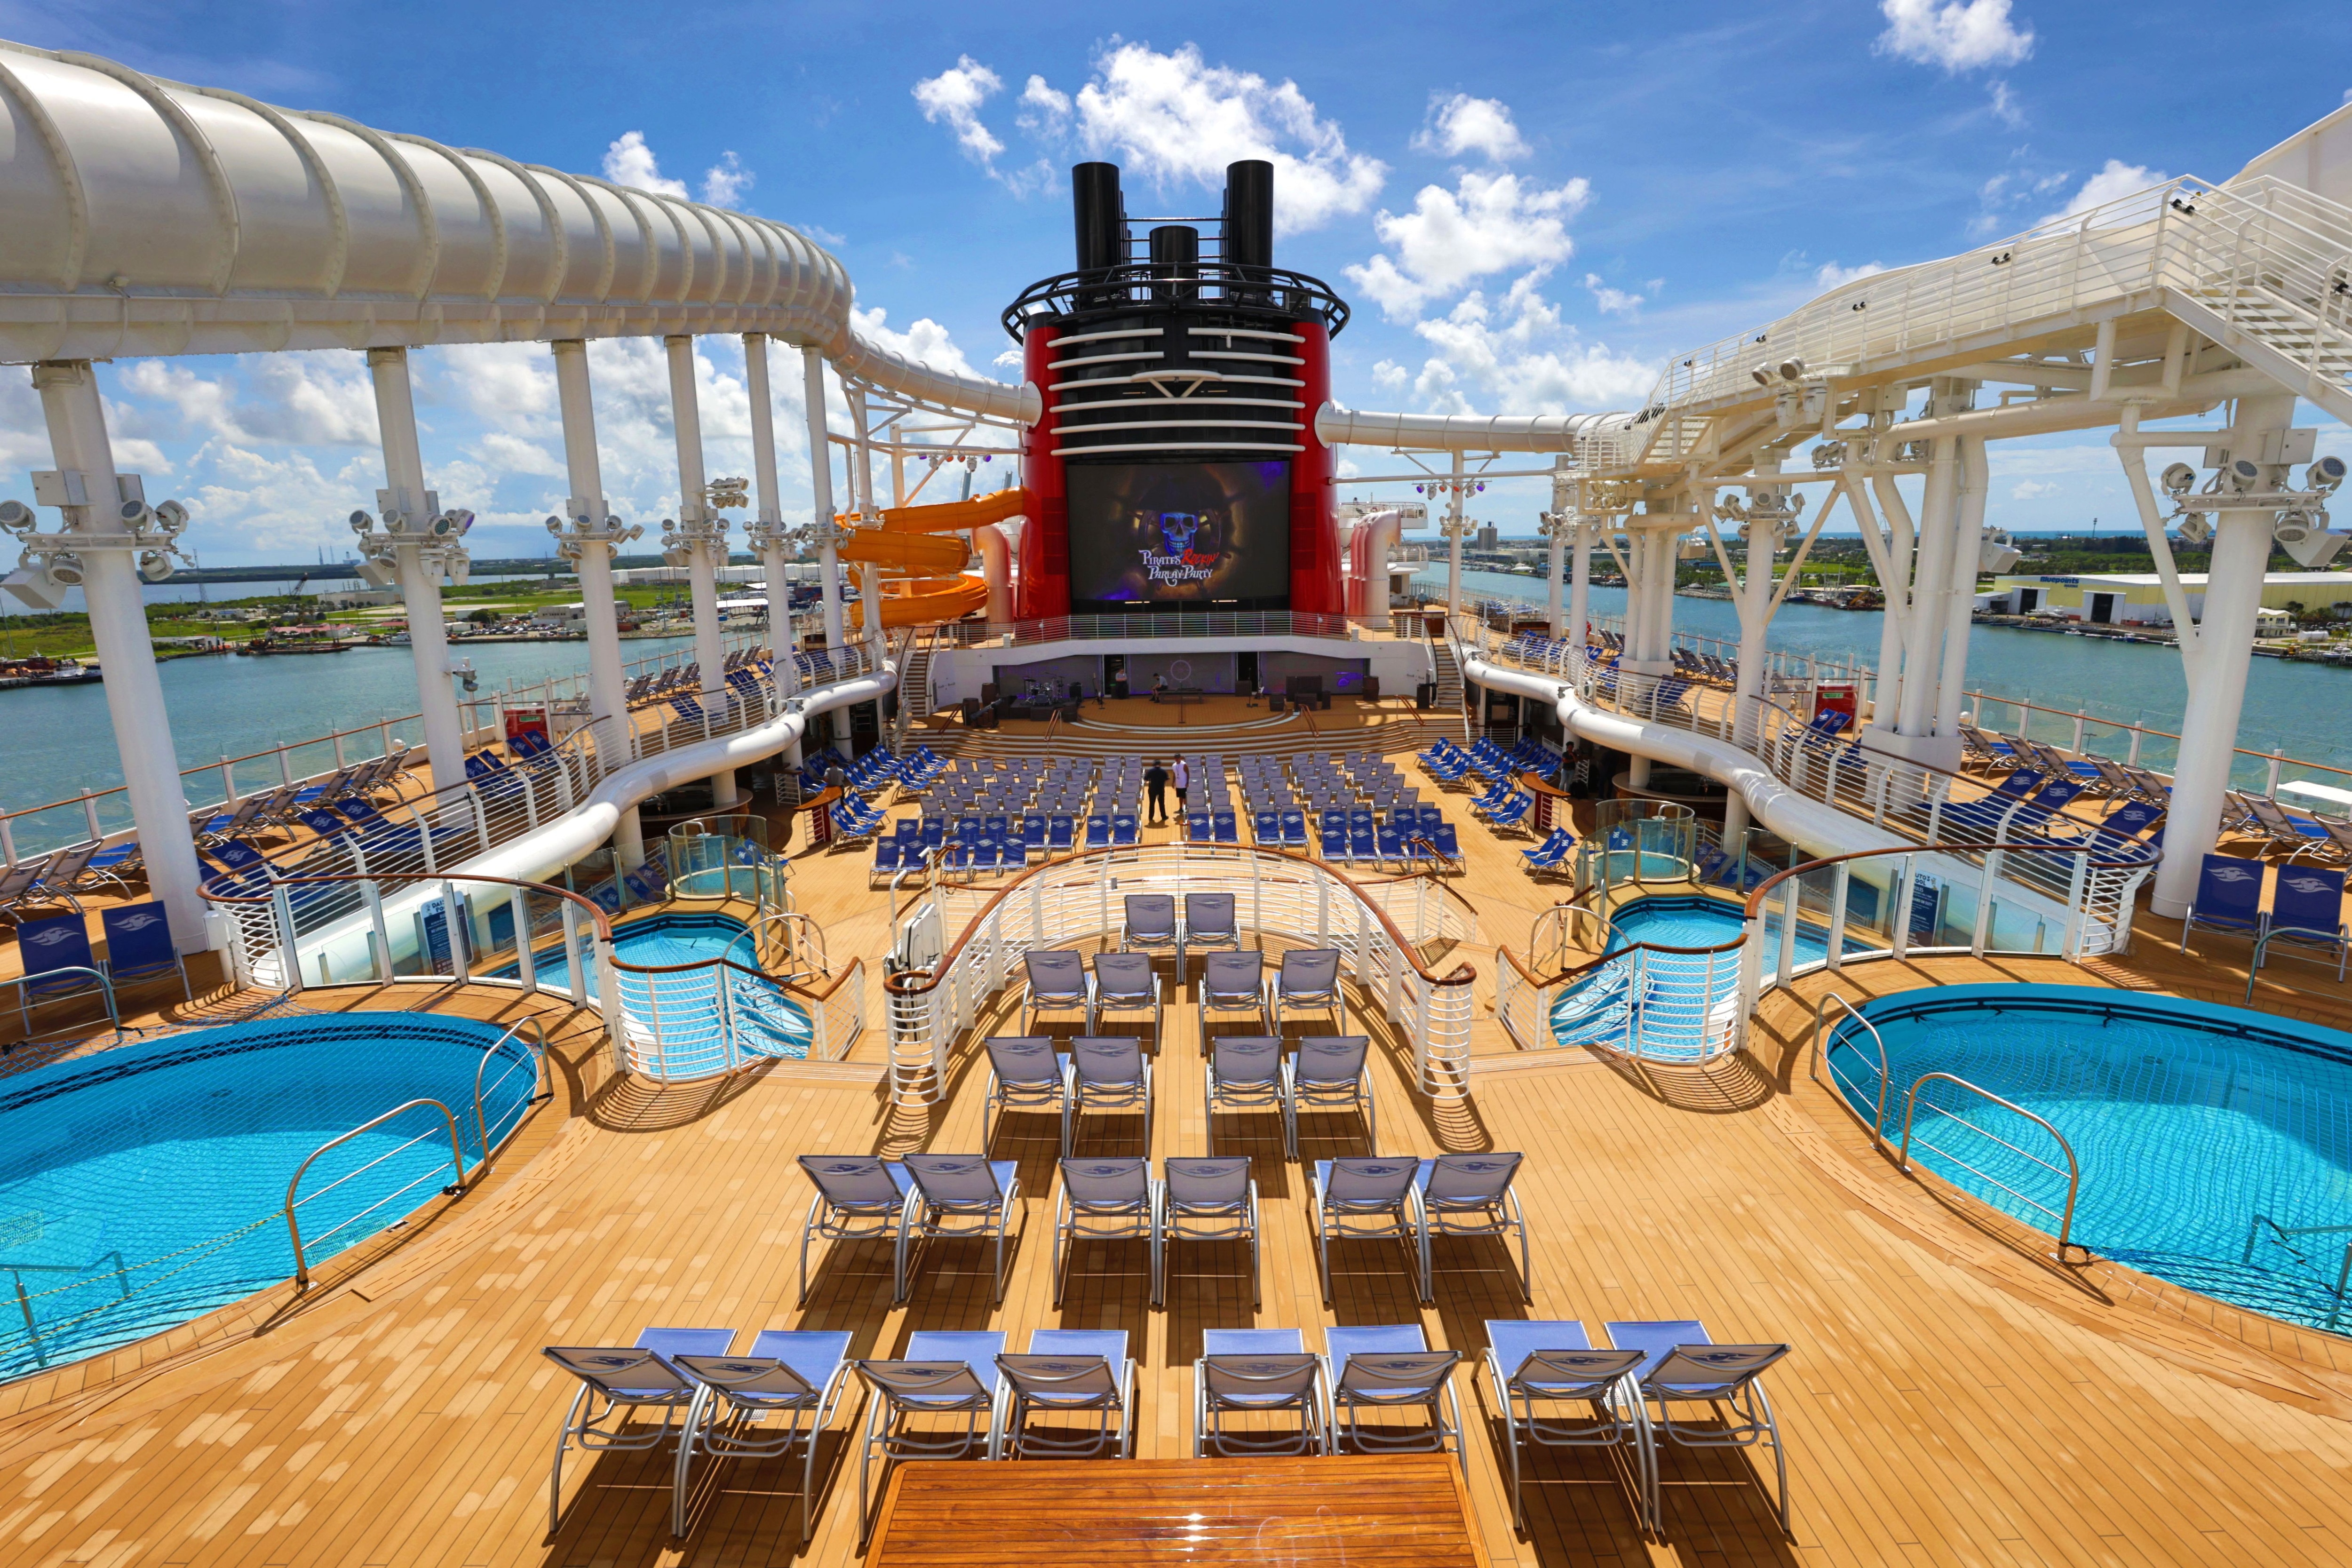 The NEW Disney Cruise Line Wish Preview - Ears of Experience